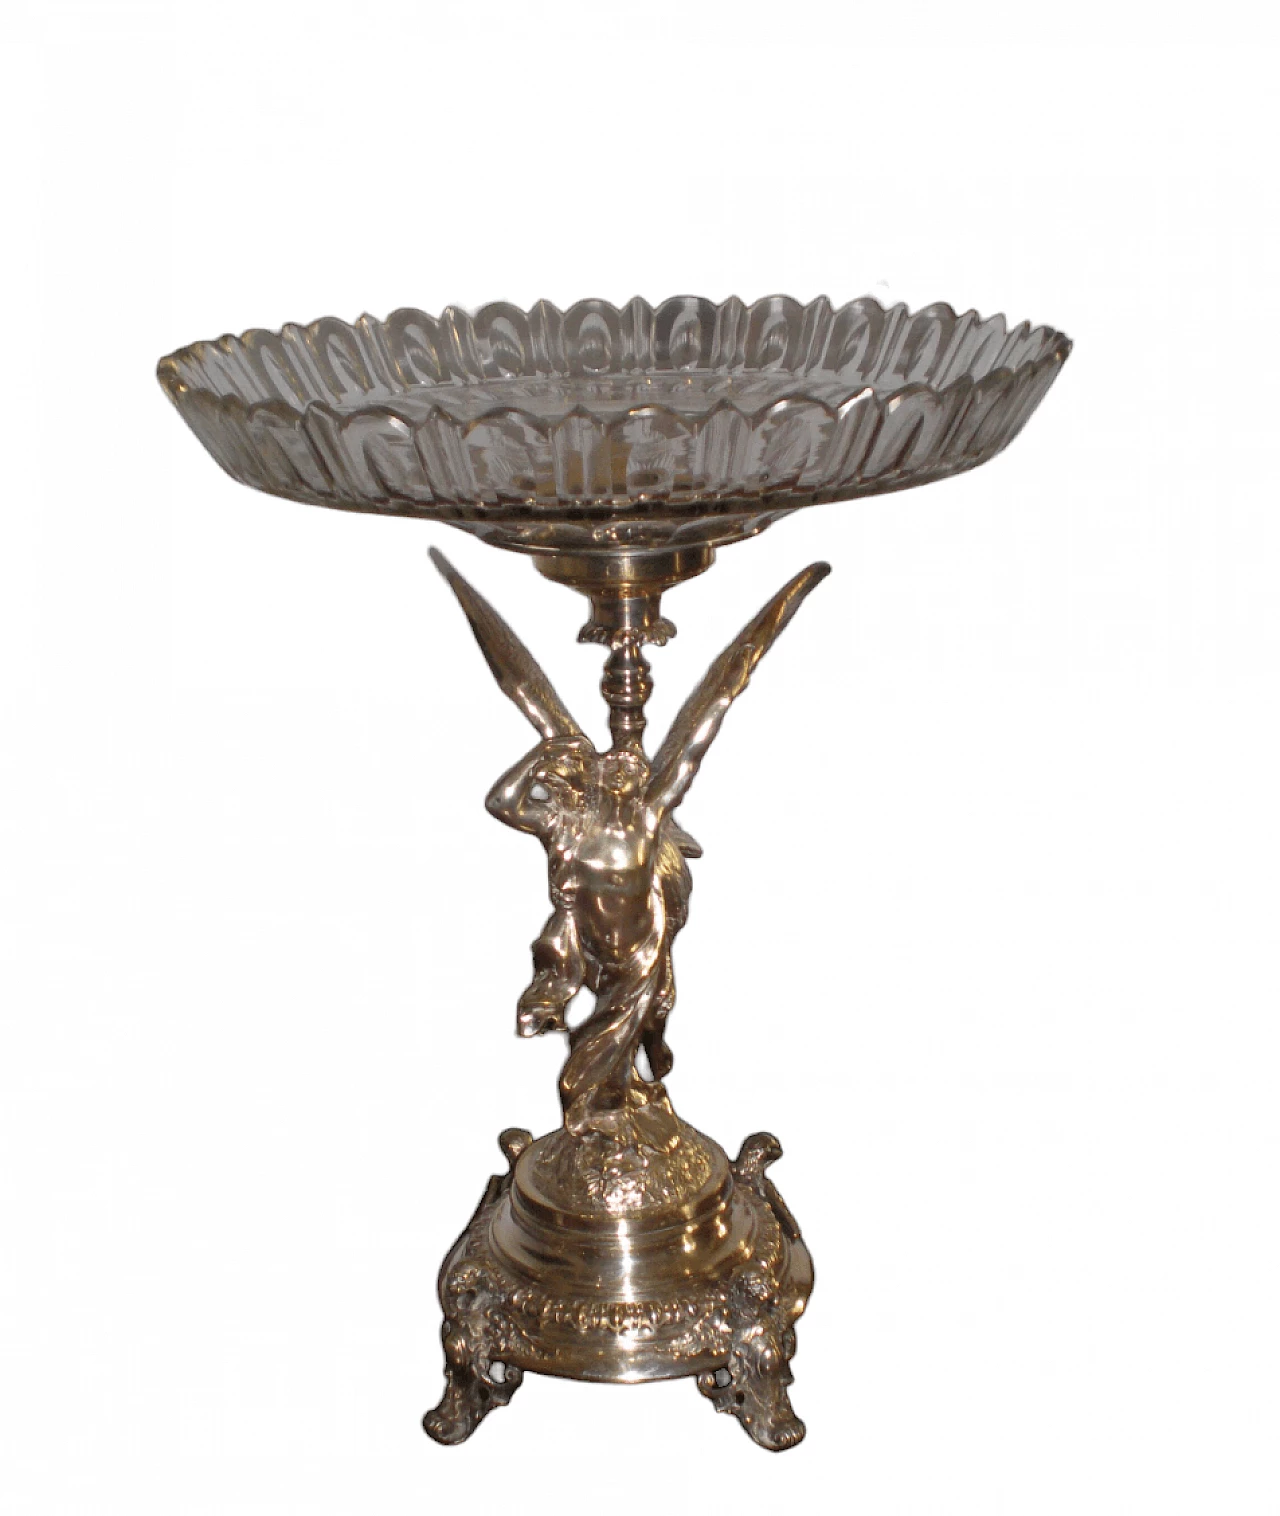 Metal and glass centerpiece raised bowl with winged figure, early 20th century 7